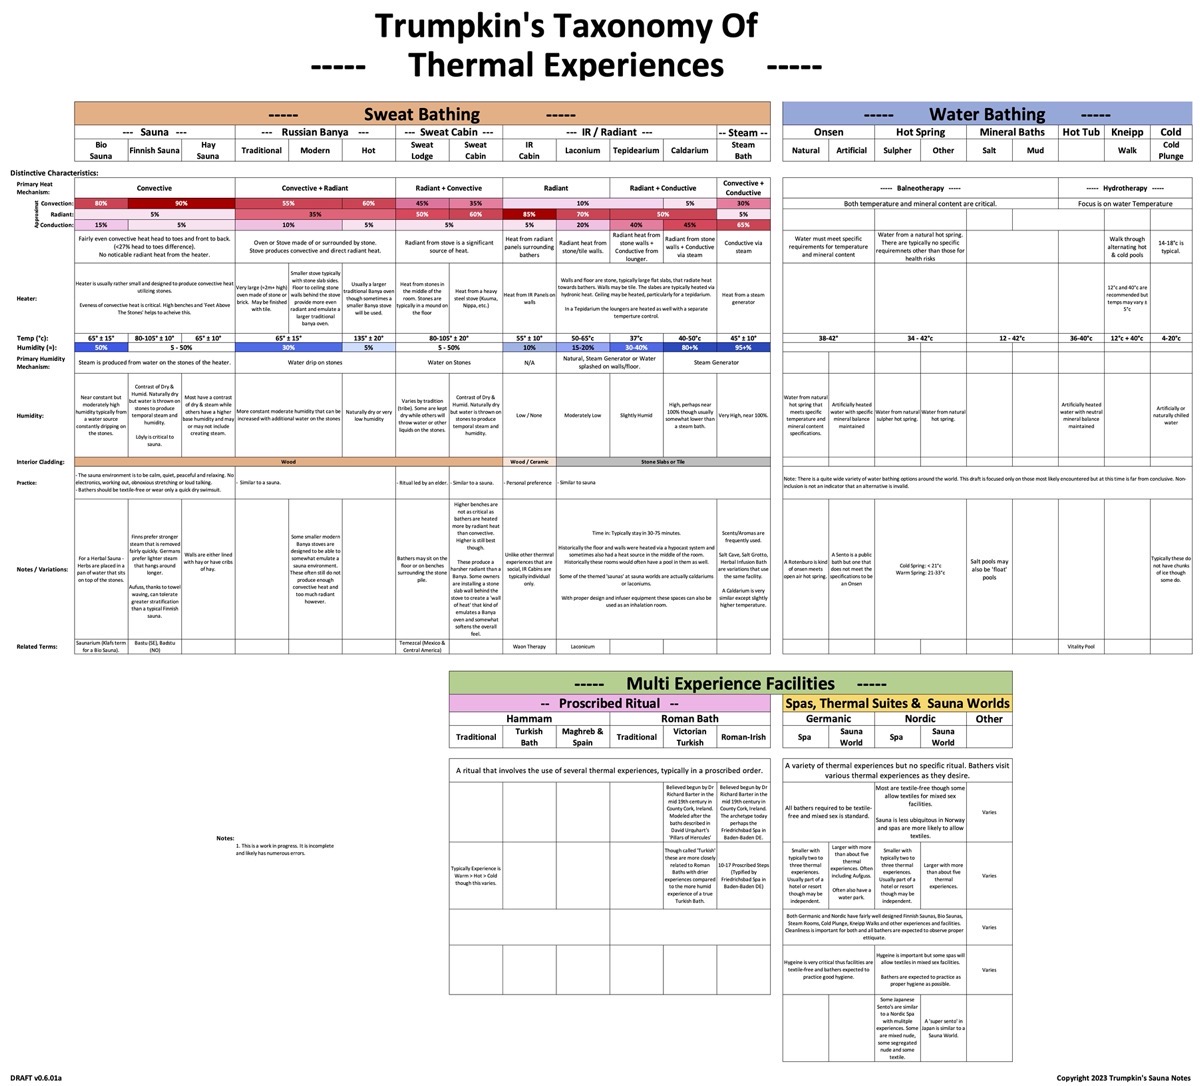 ThermalTaxonomy061a